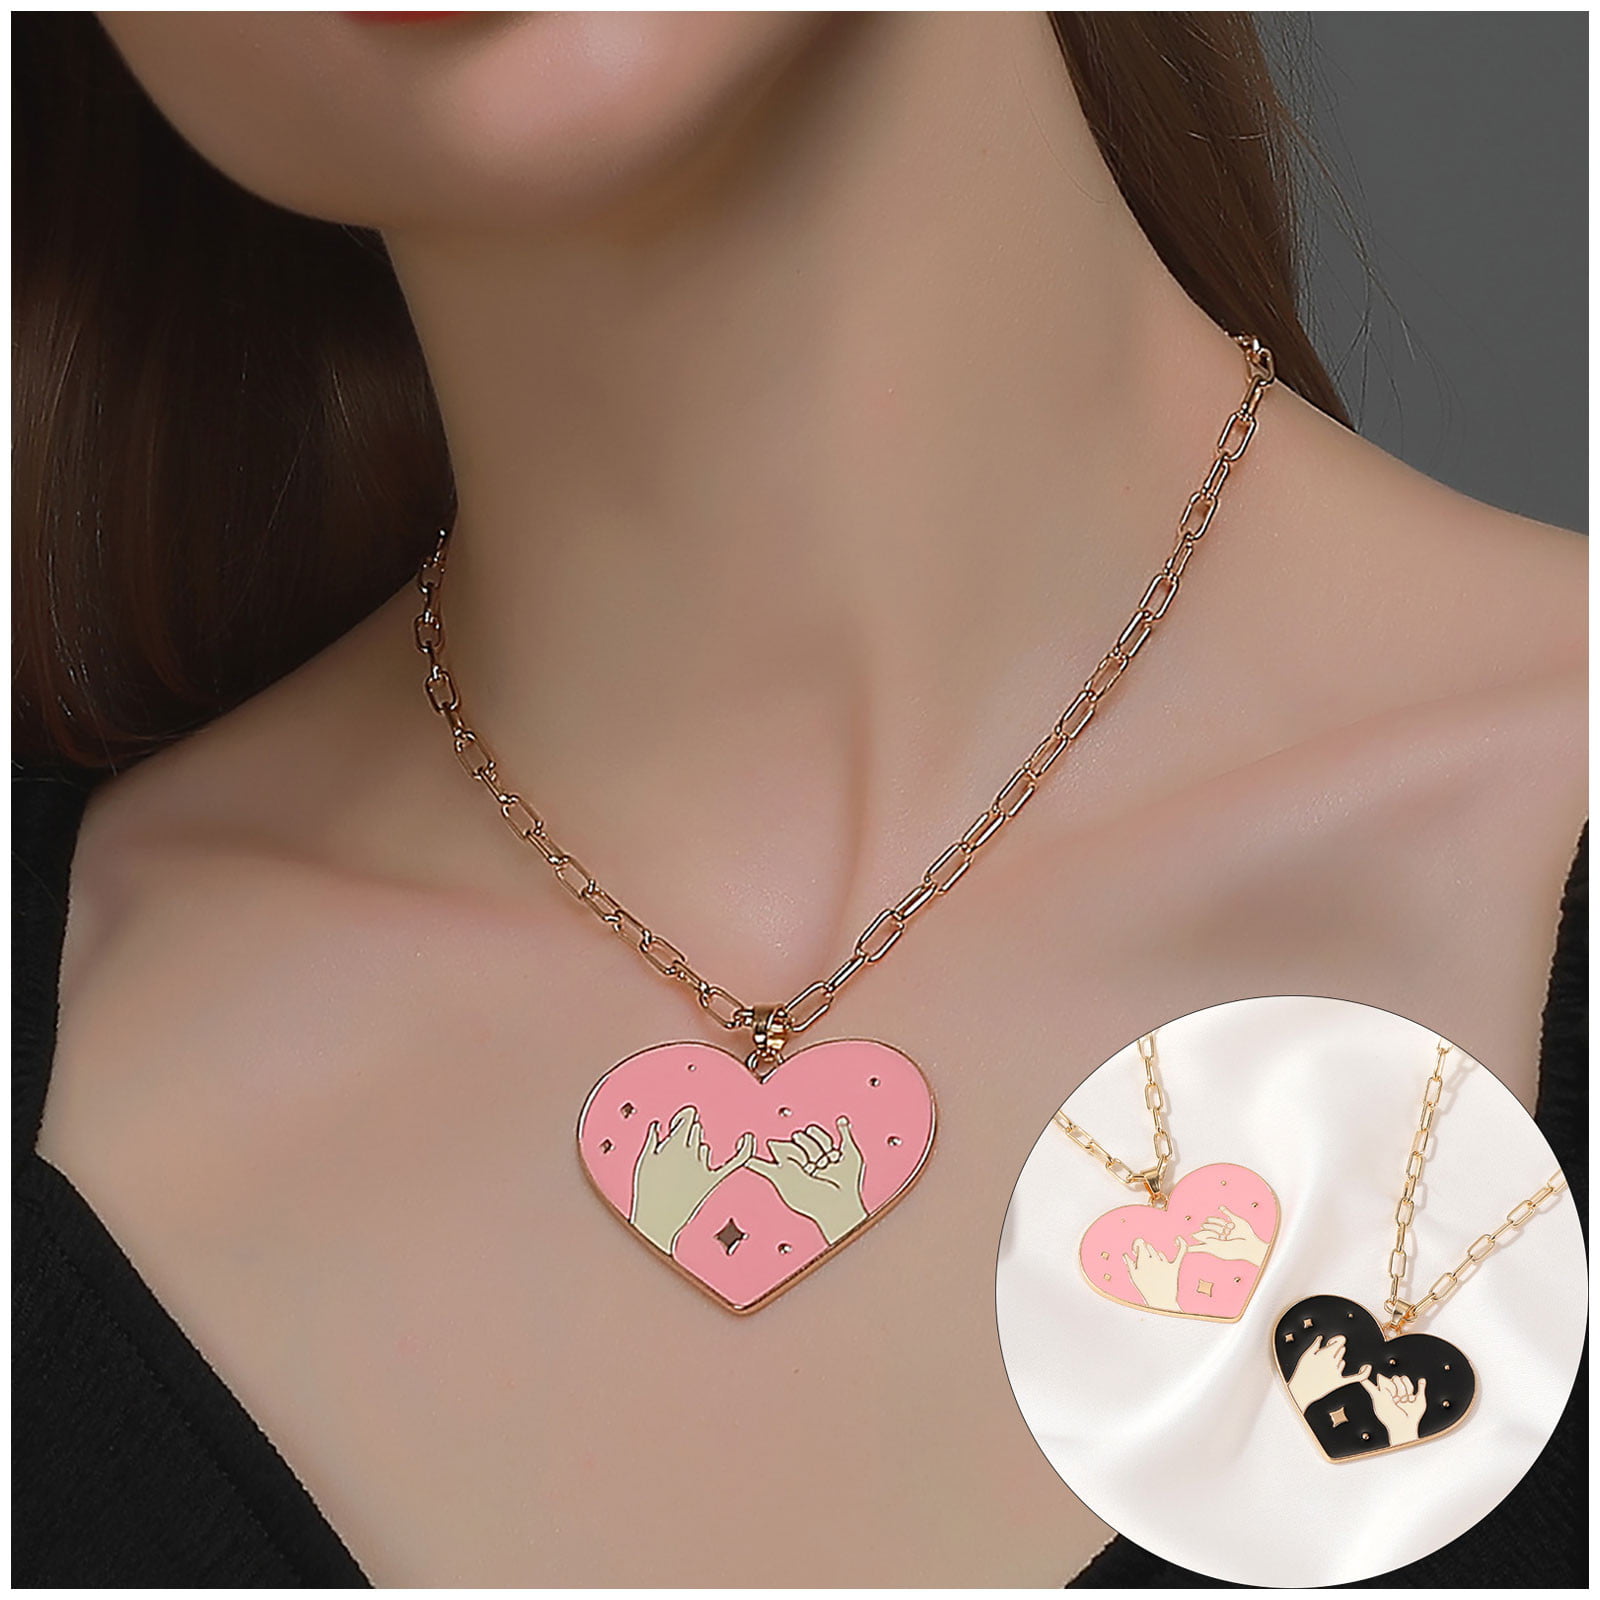 Words of power chain necklace with a pendant Fall in love - Korola